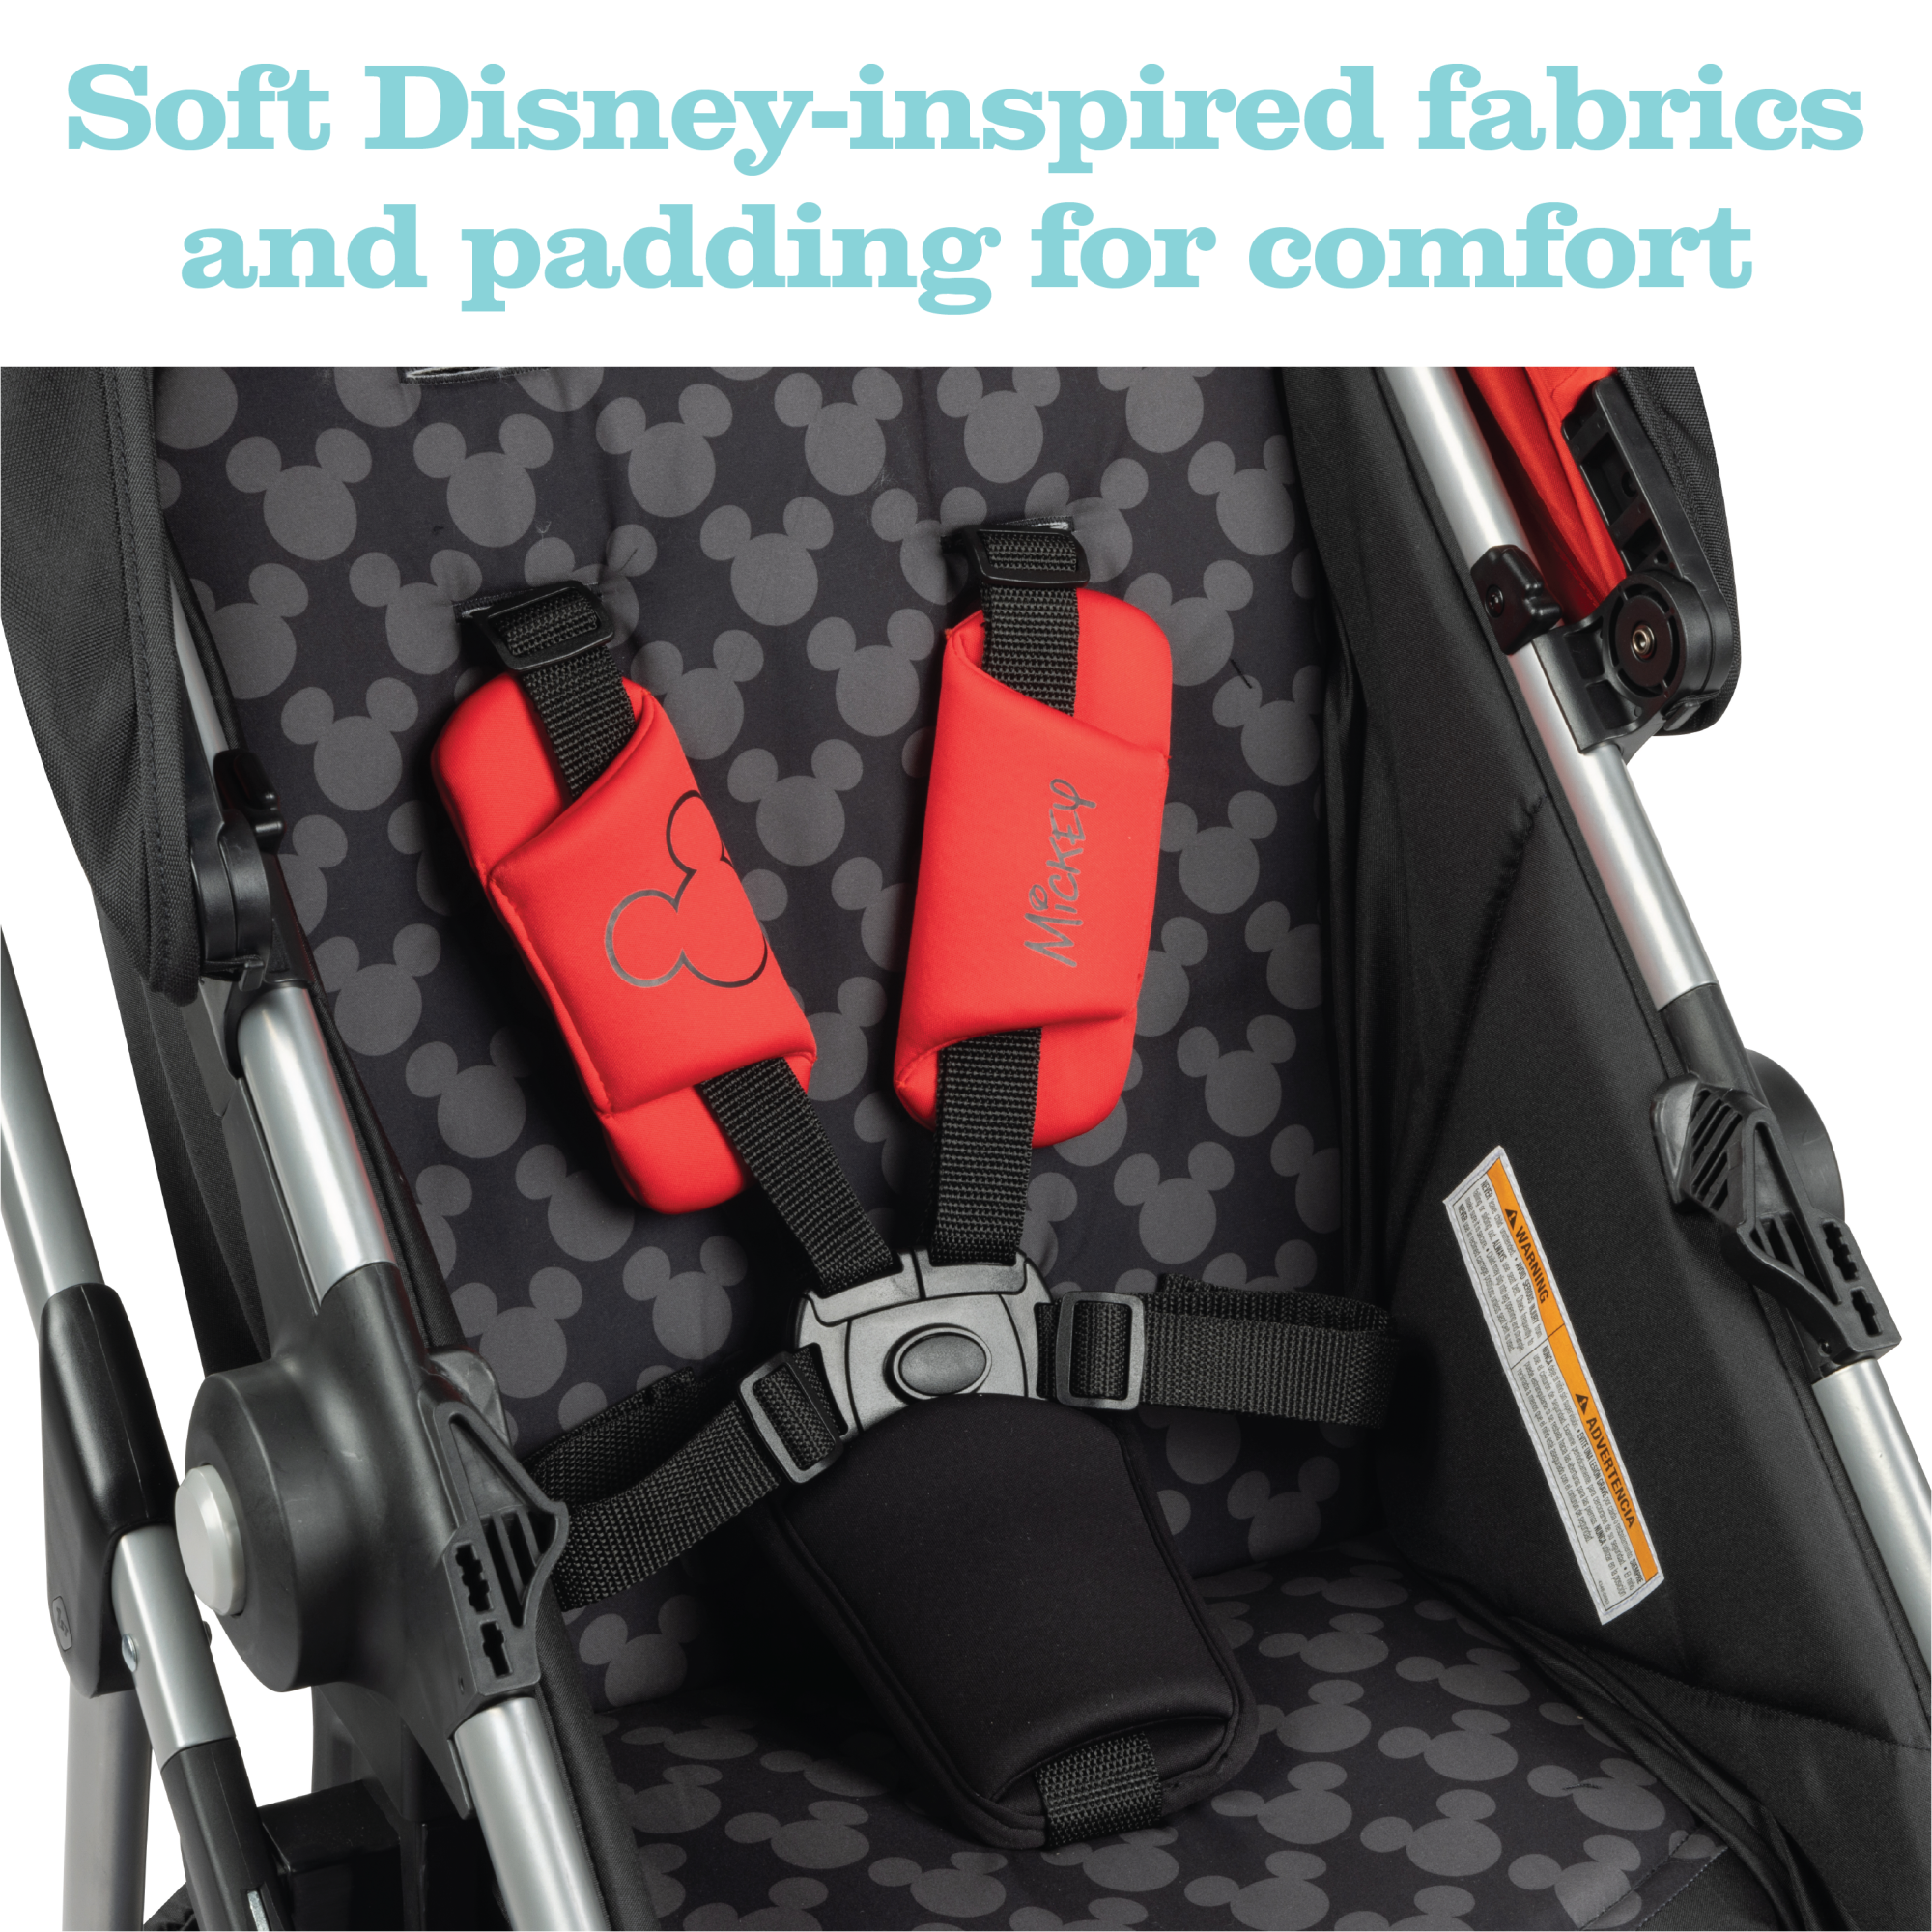 Disney Baby Grow and Go™ Modular Travel System - soft Disney-inspired fabrics and padding for comfort